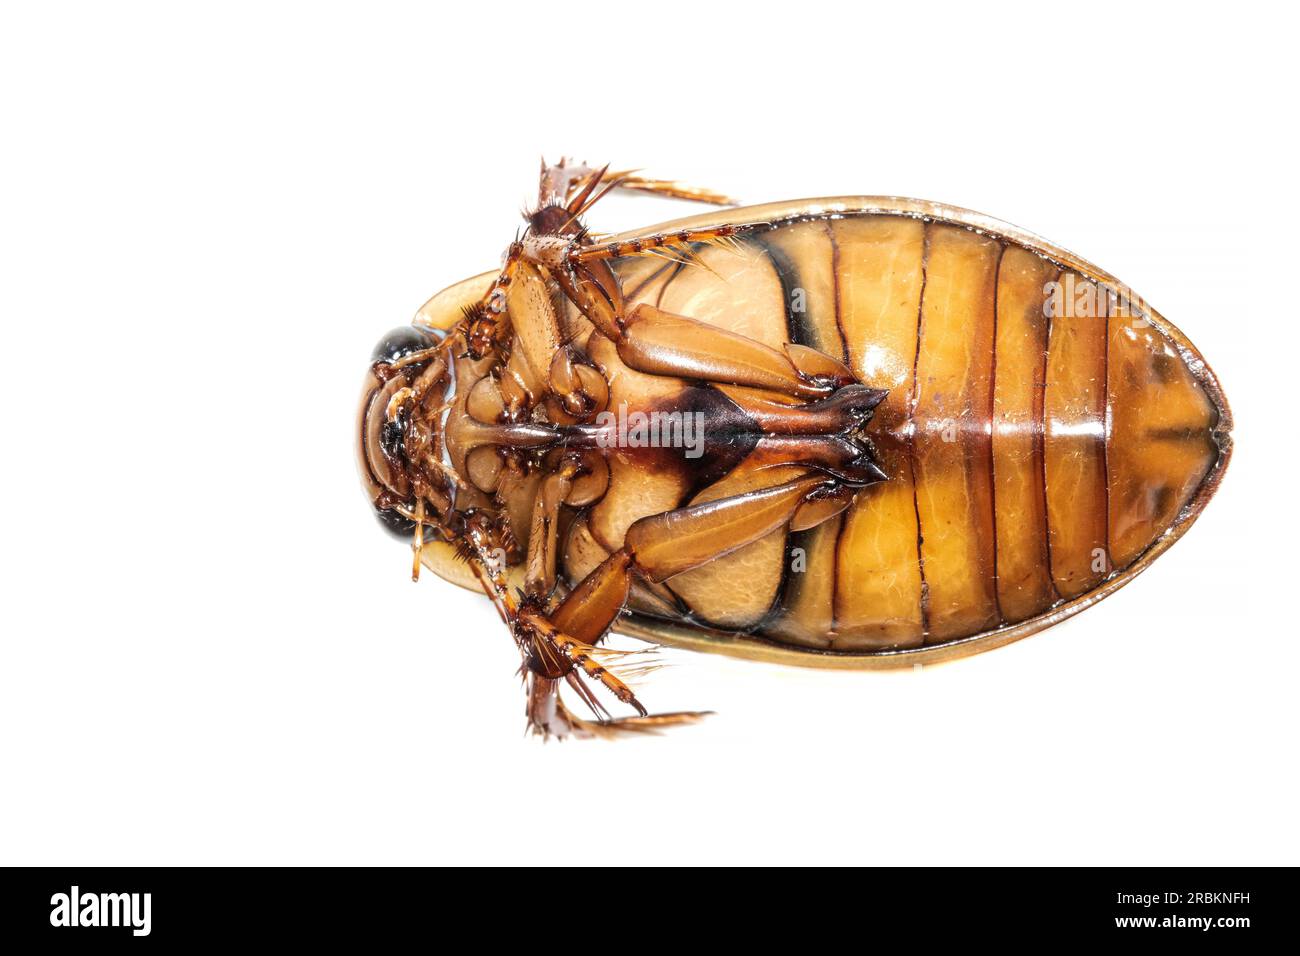 Great diving beetle (Dytiscus marginalis), unserside, cut out, Netherlands Stock Photo